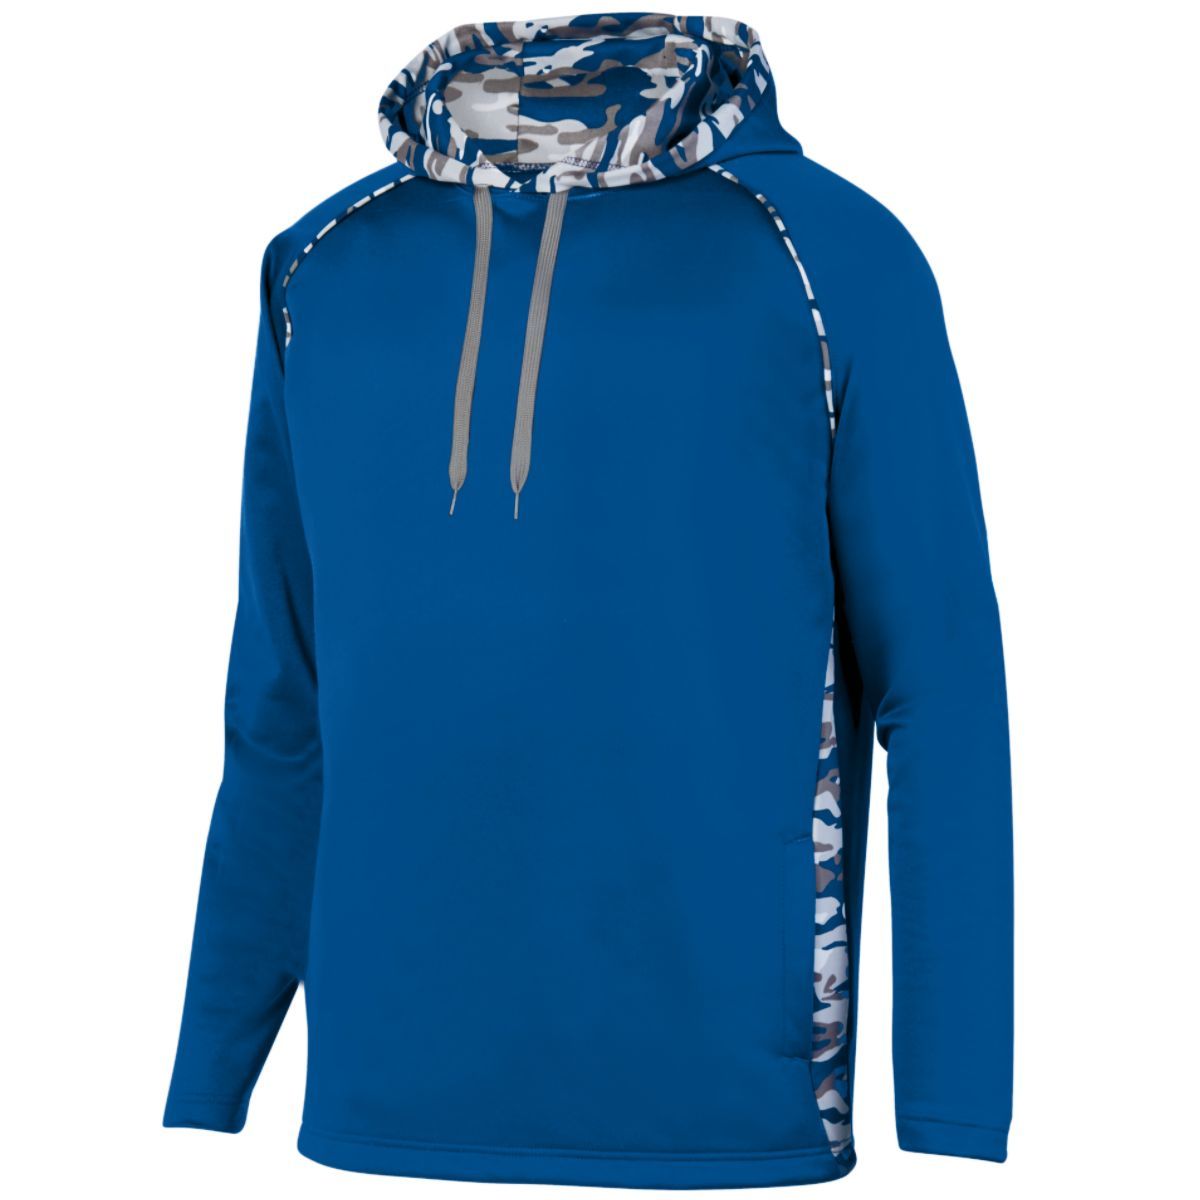 Augusta Sportswear Mod Camo Hoodie in Royal/Royal Mod  -Part of the Adult, Adult-Hoodie, Hoodies, Augusta-Products product lines at KanaleyCreations.com